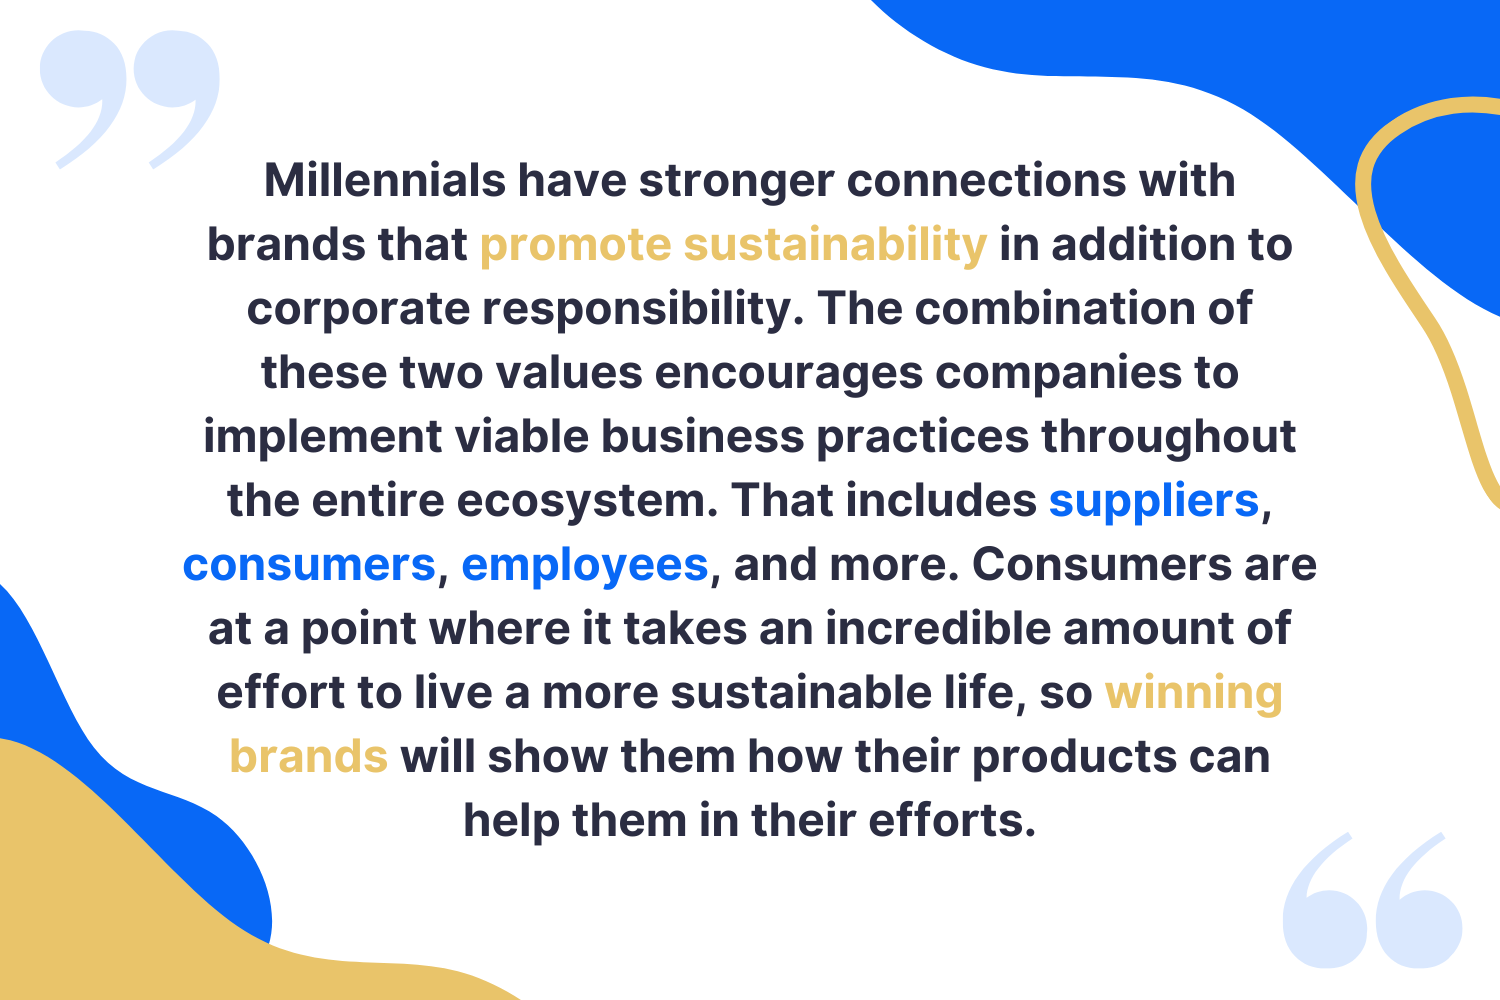 Millennials have stronger connections with brands that promote sustainability